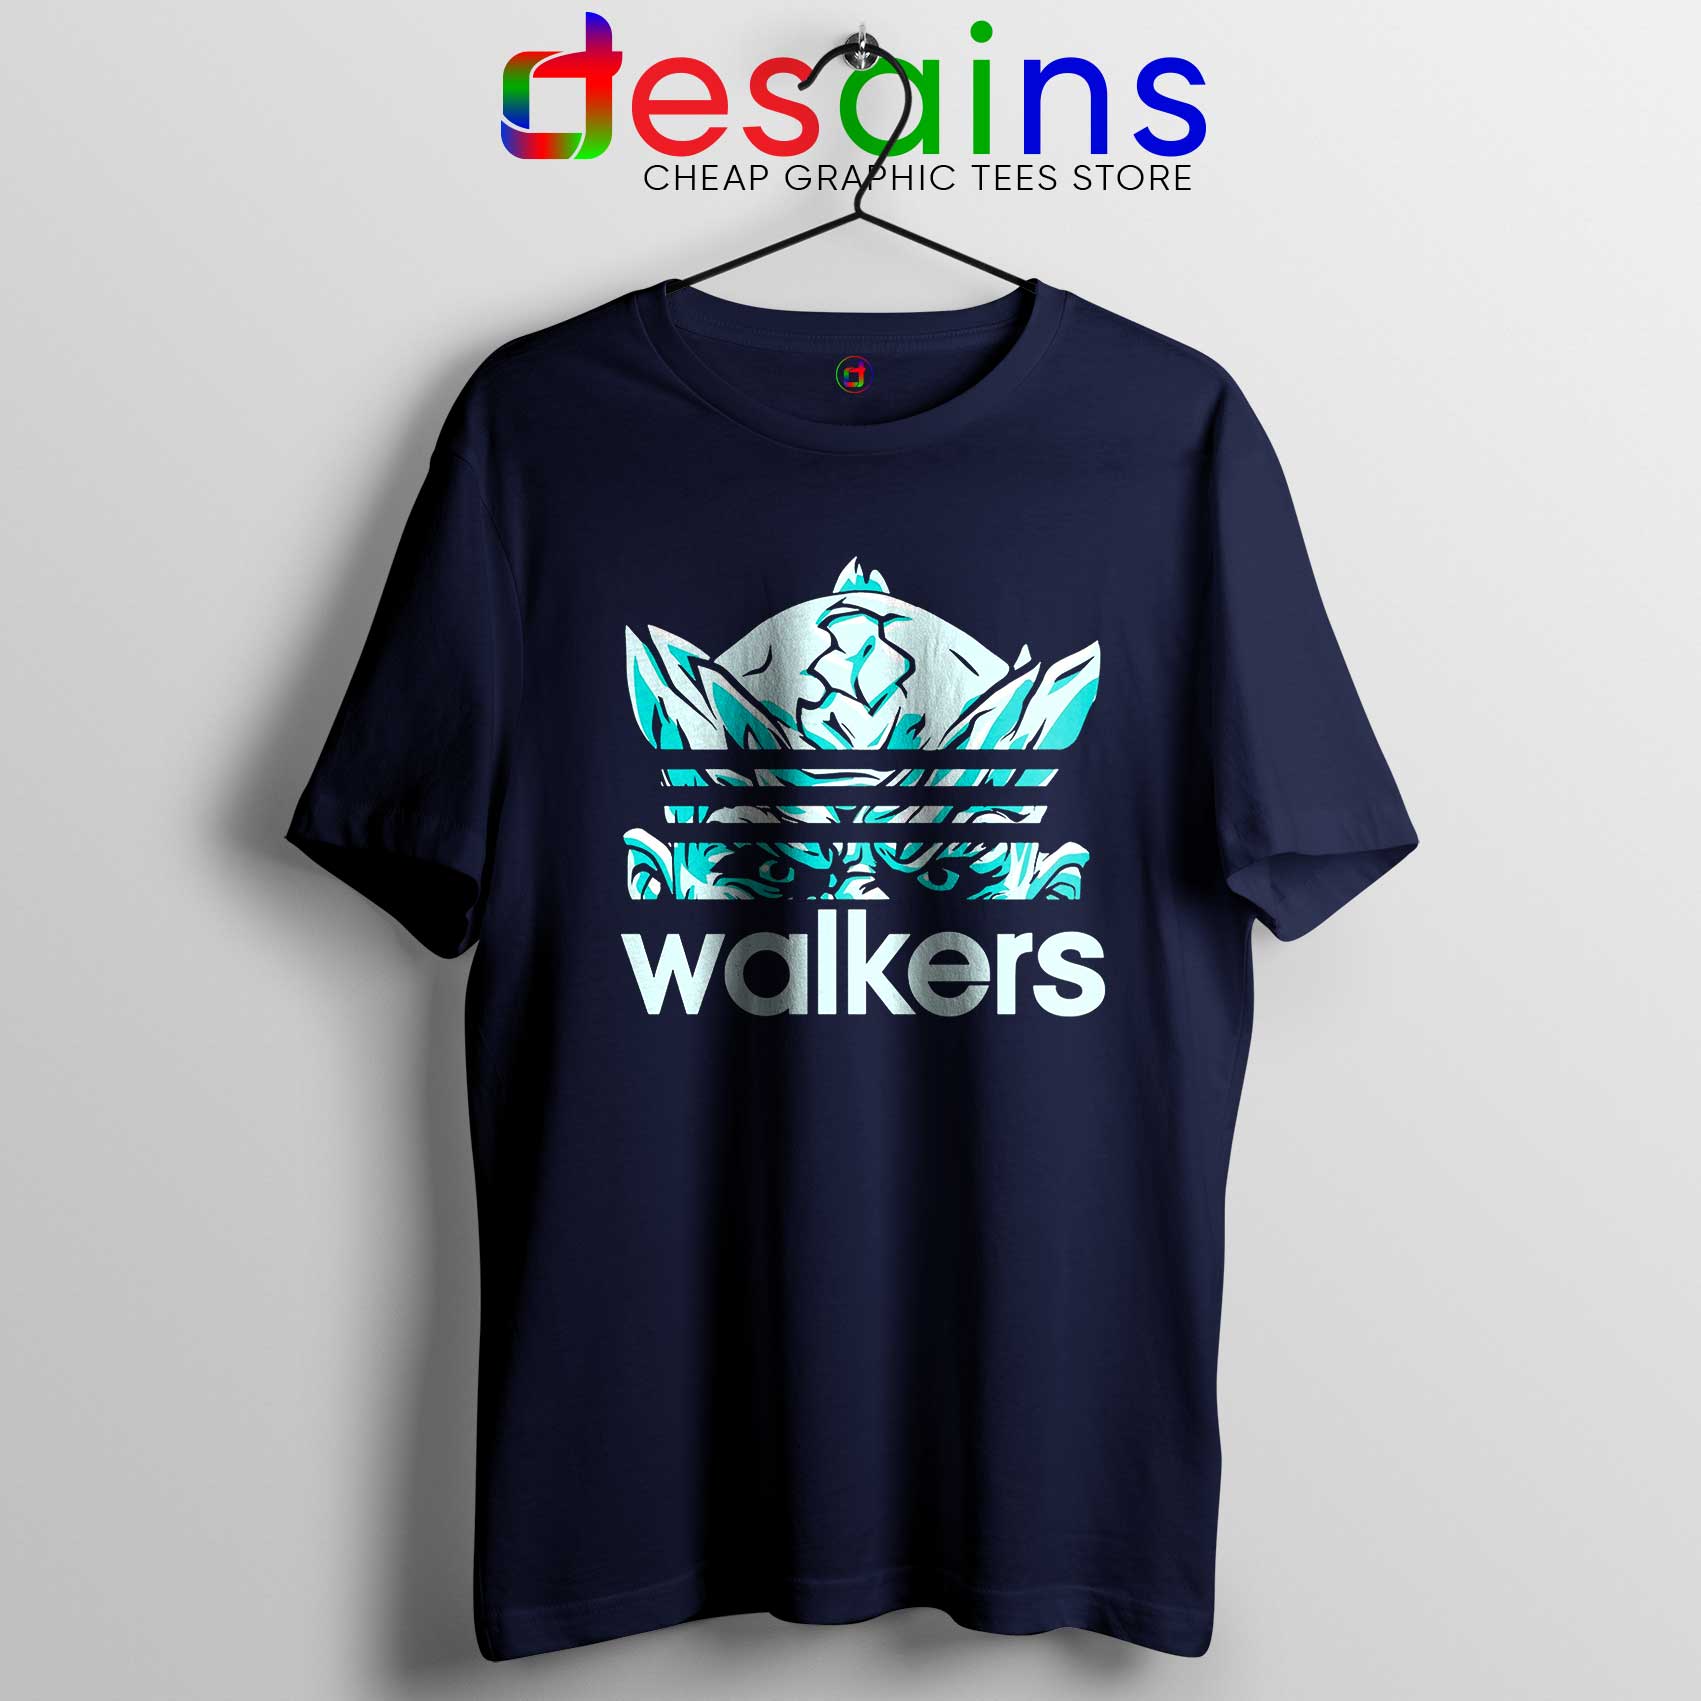 Buy White Walker Adidas Tee Shirt Game Of Thrones Size S 3xl